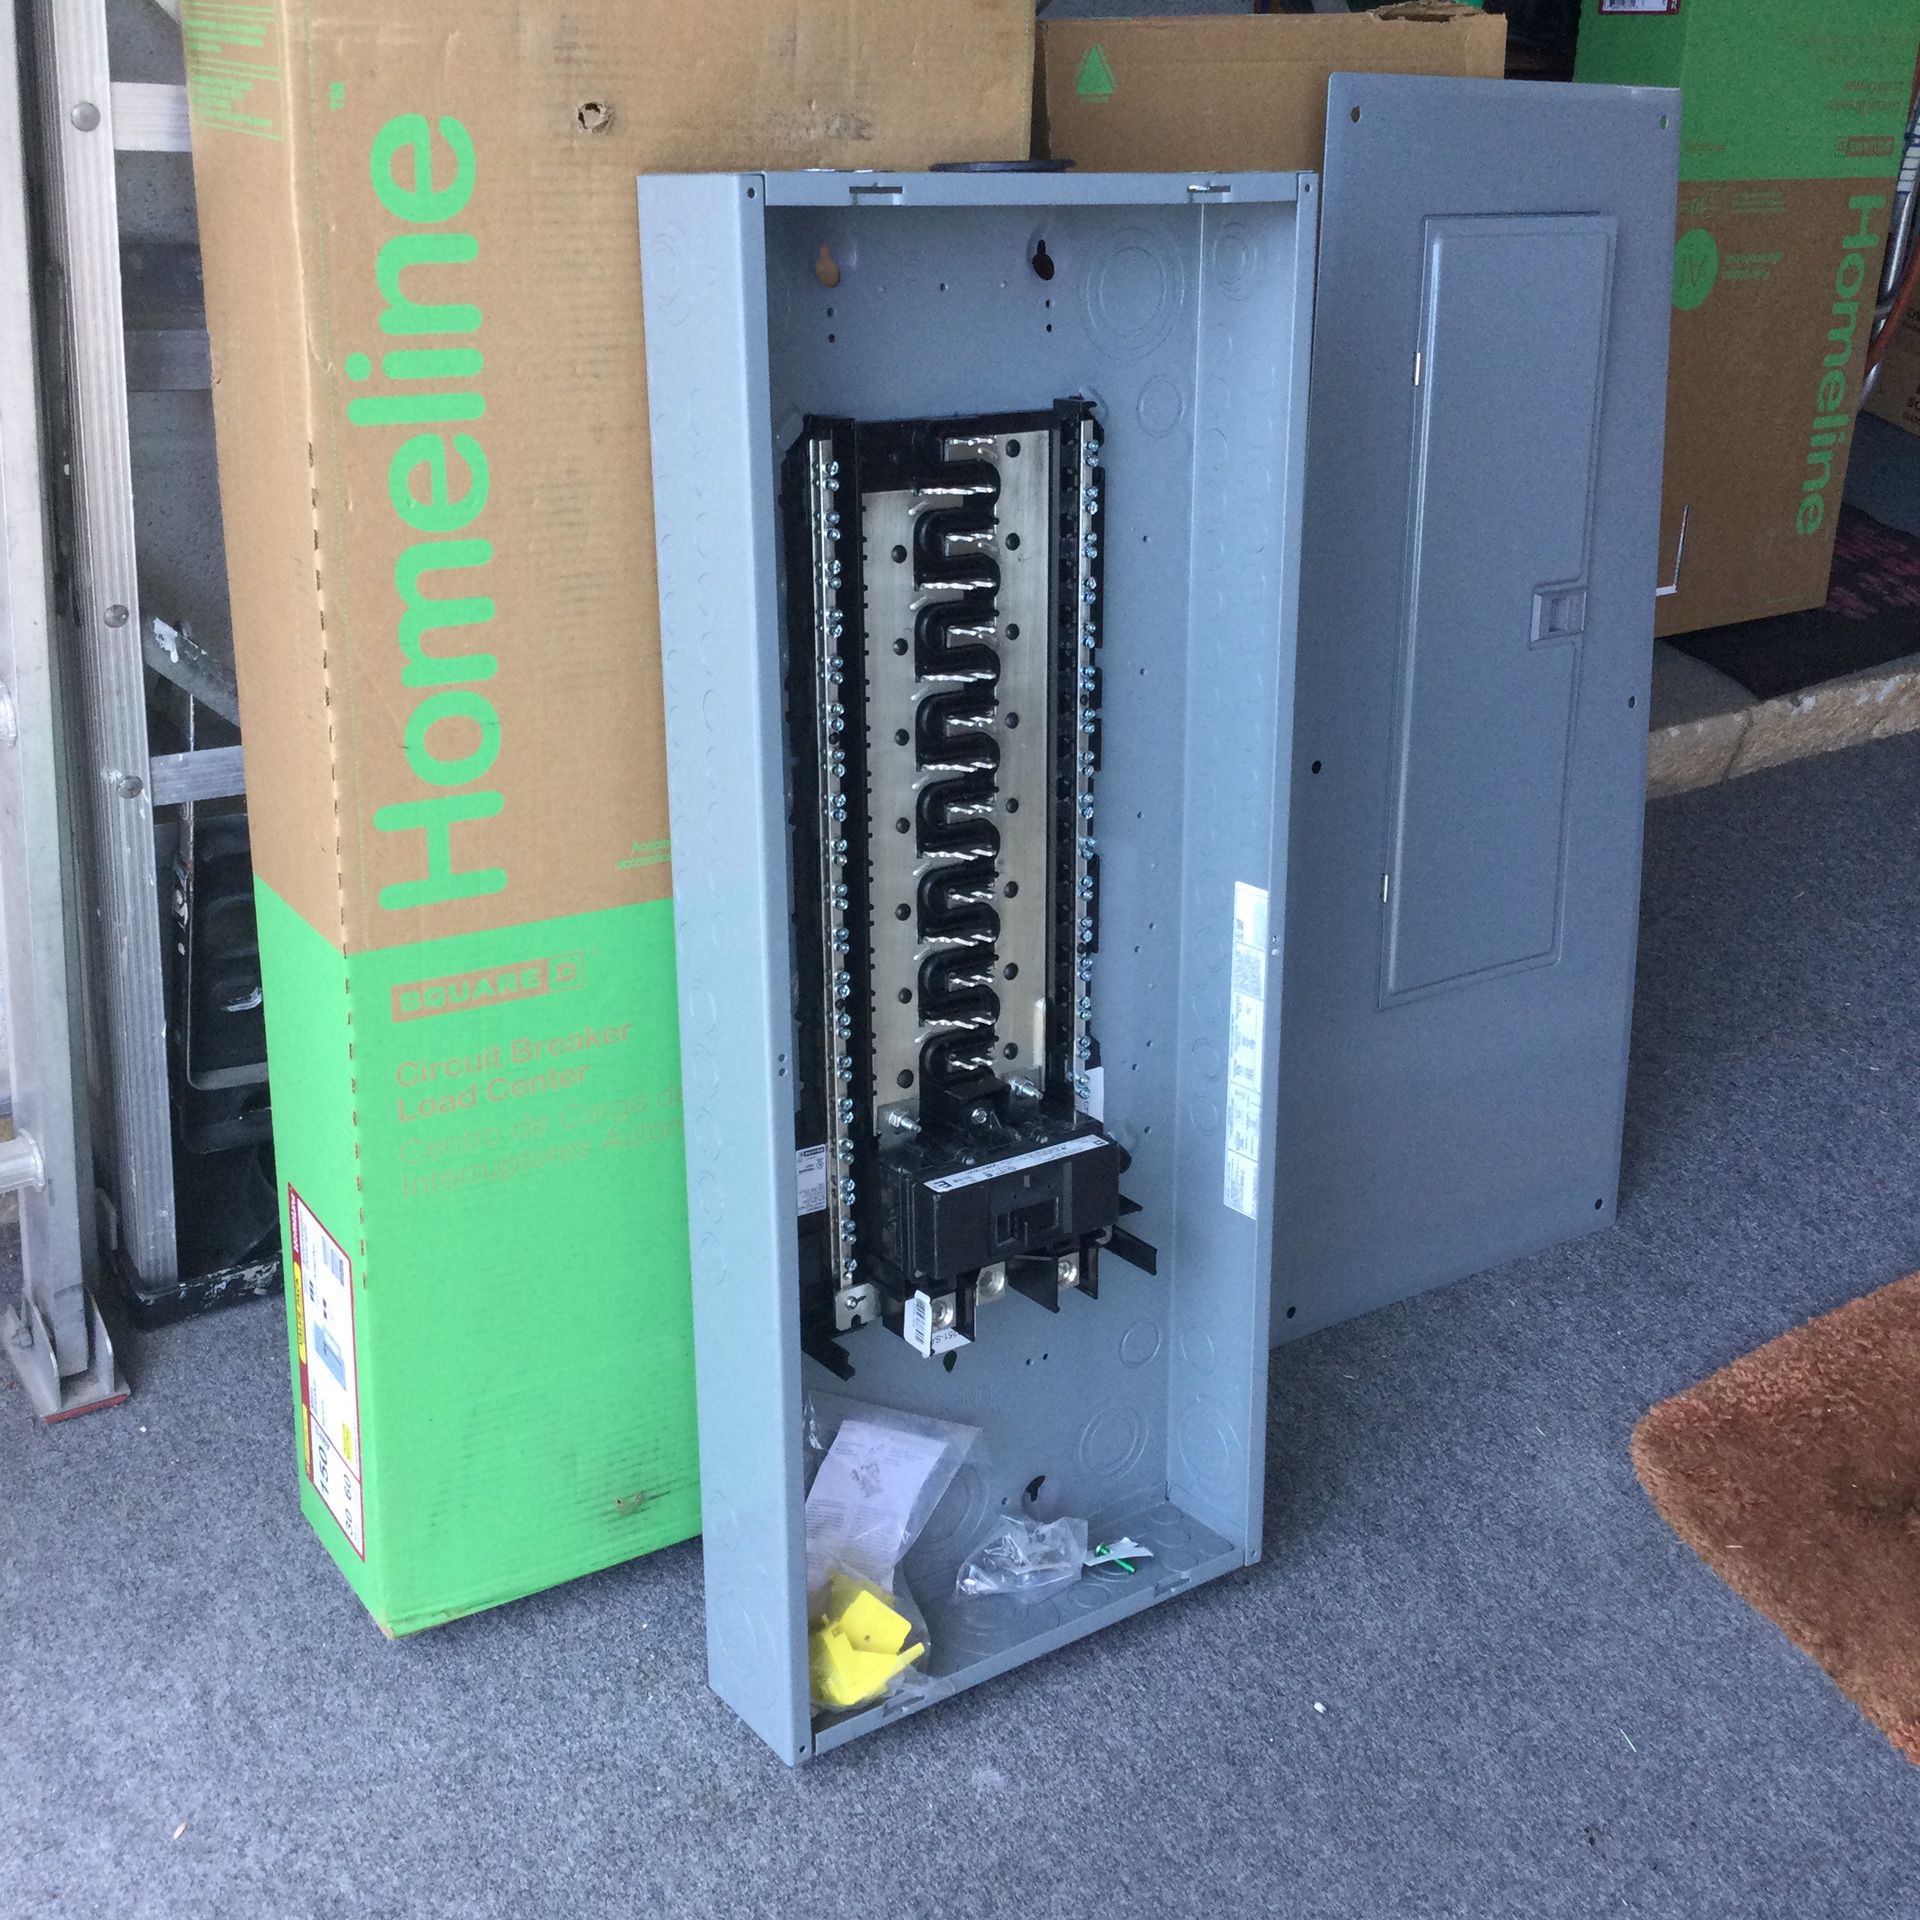 Electrical panel (New) Homeline Square D 150 Amp. Includes 150 Amp main breaker. (INCLUDED)